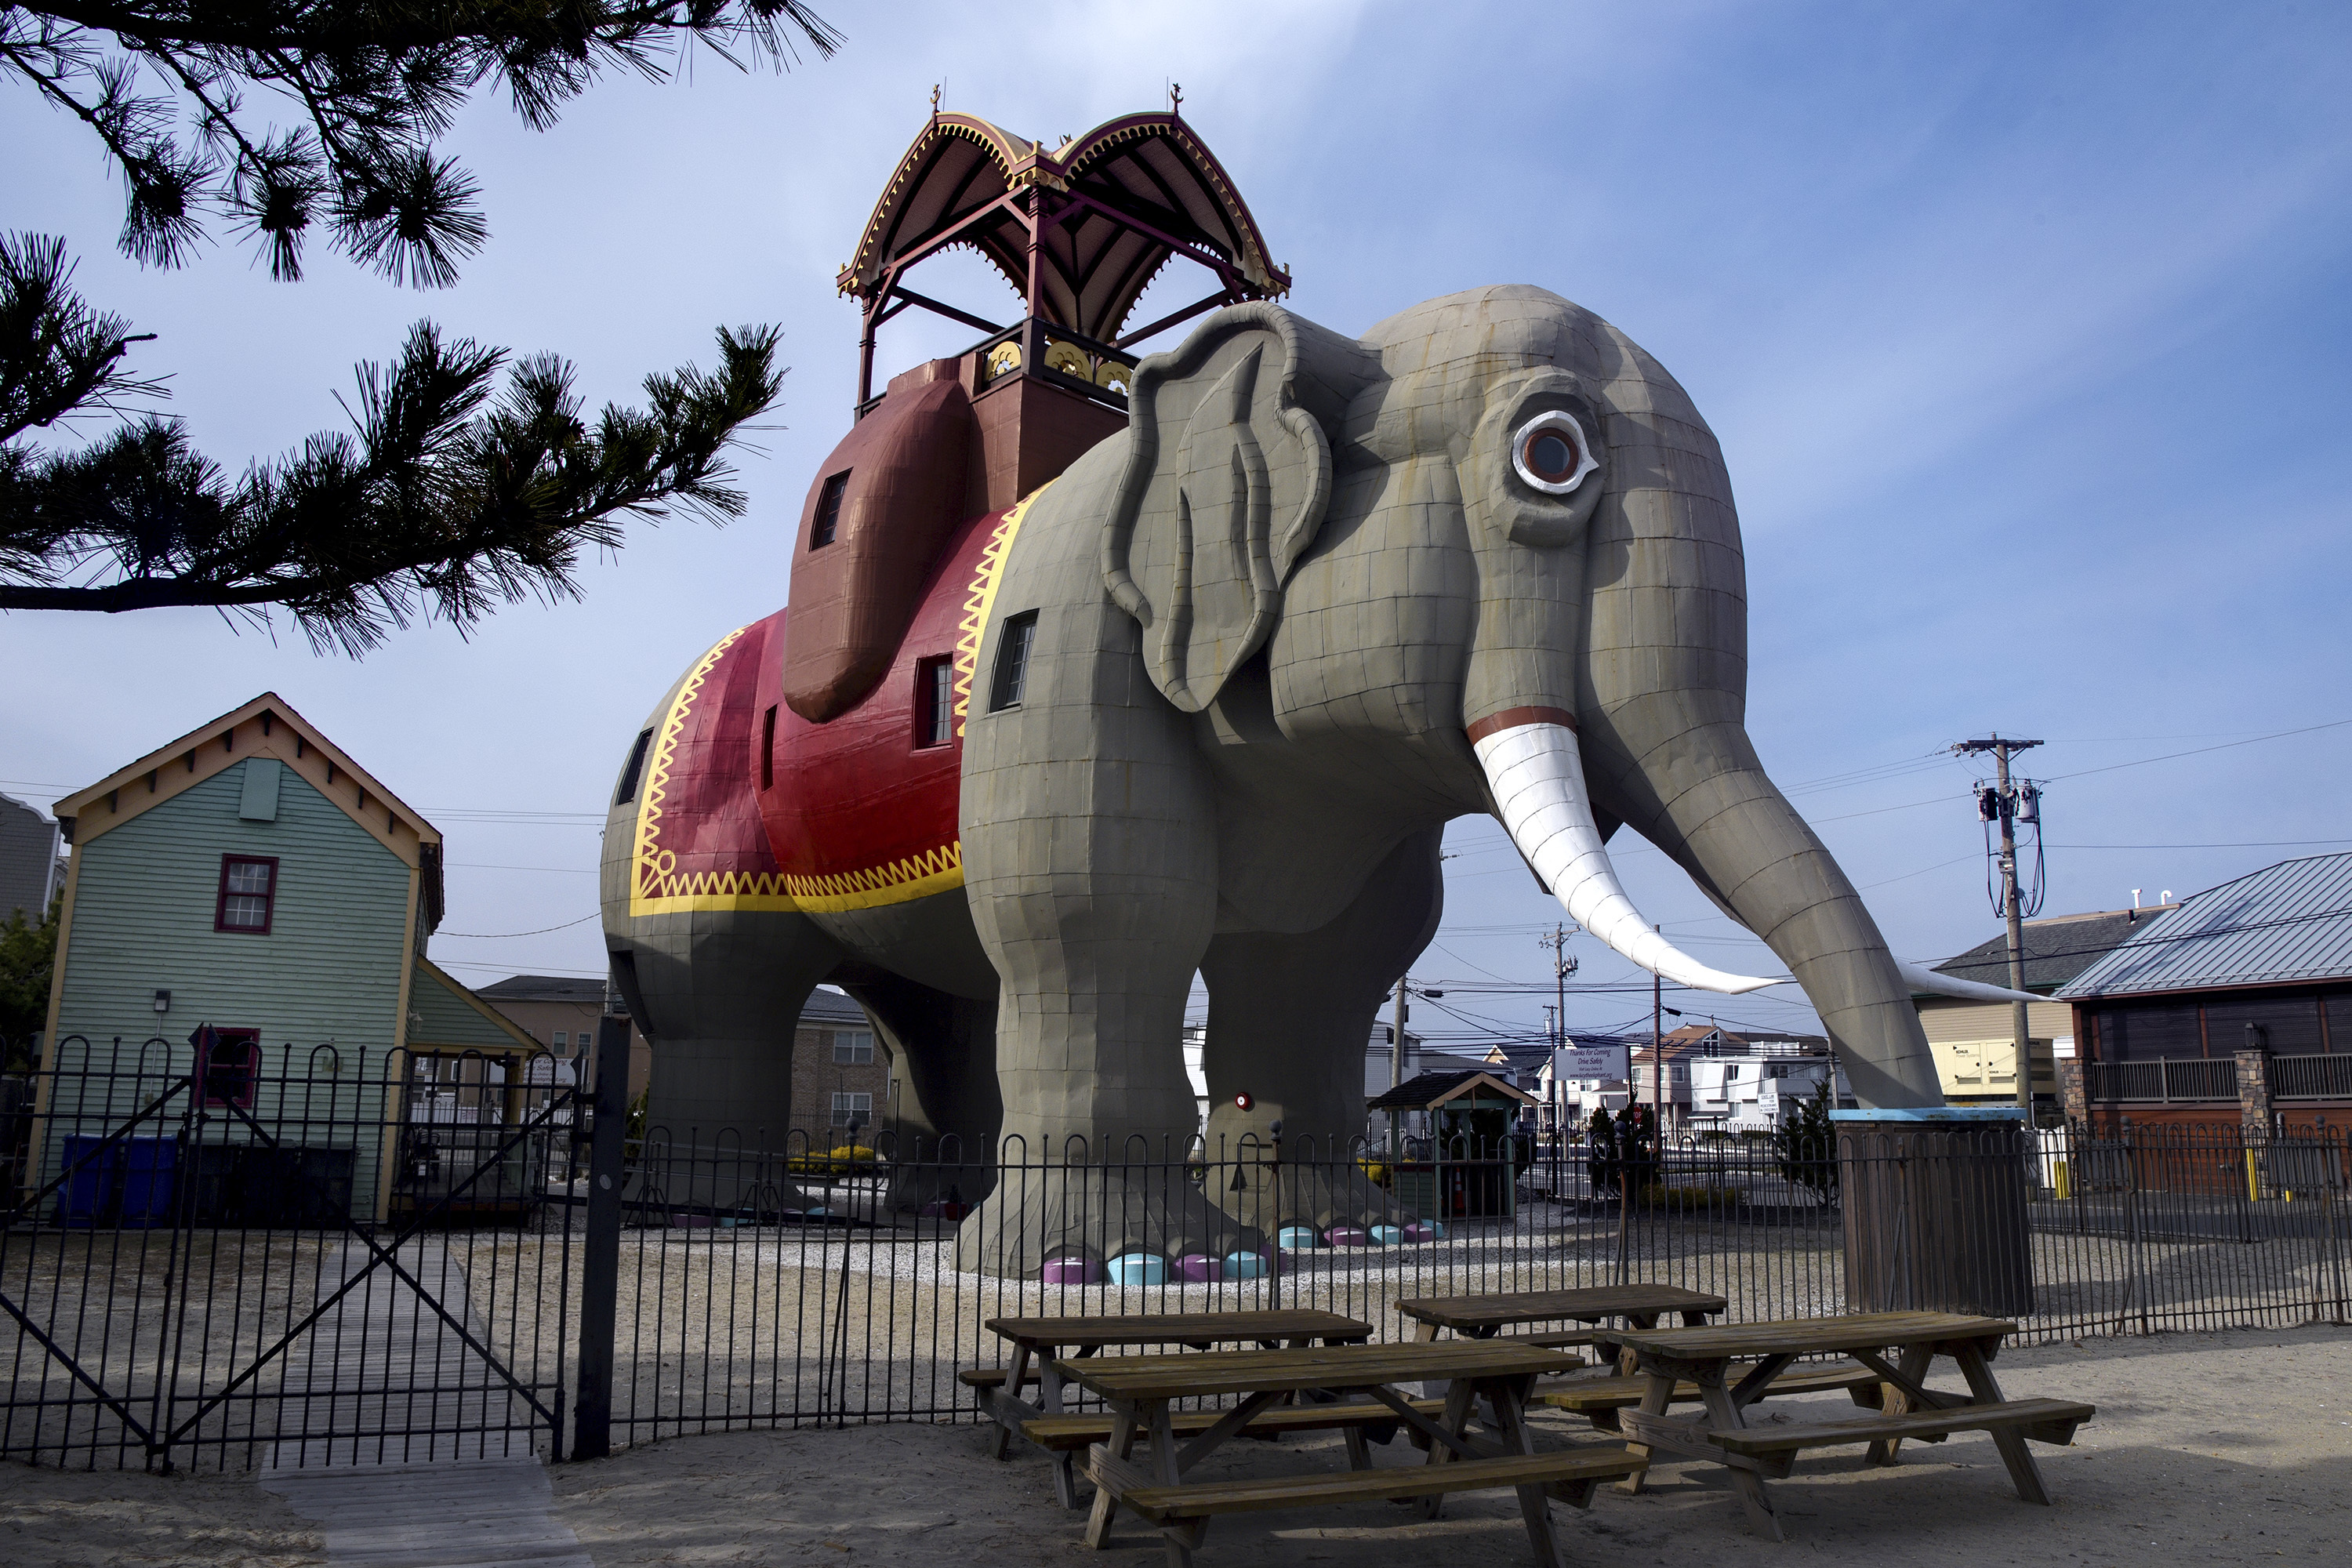 Lucy the Elephant, a historic roadside attraction at the Jersey Shore